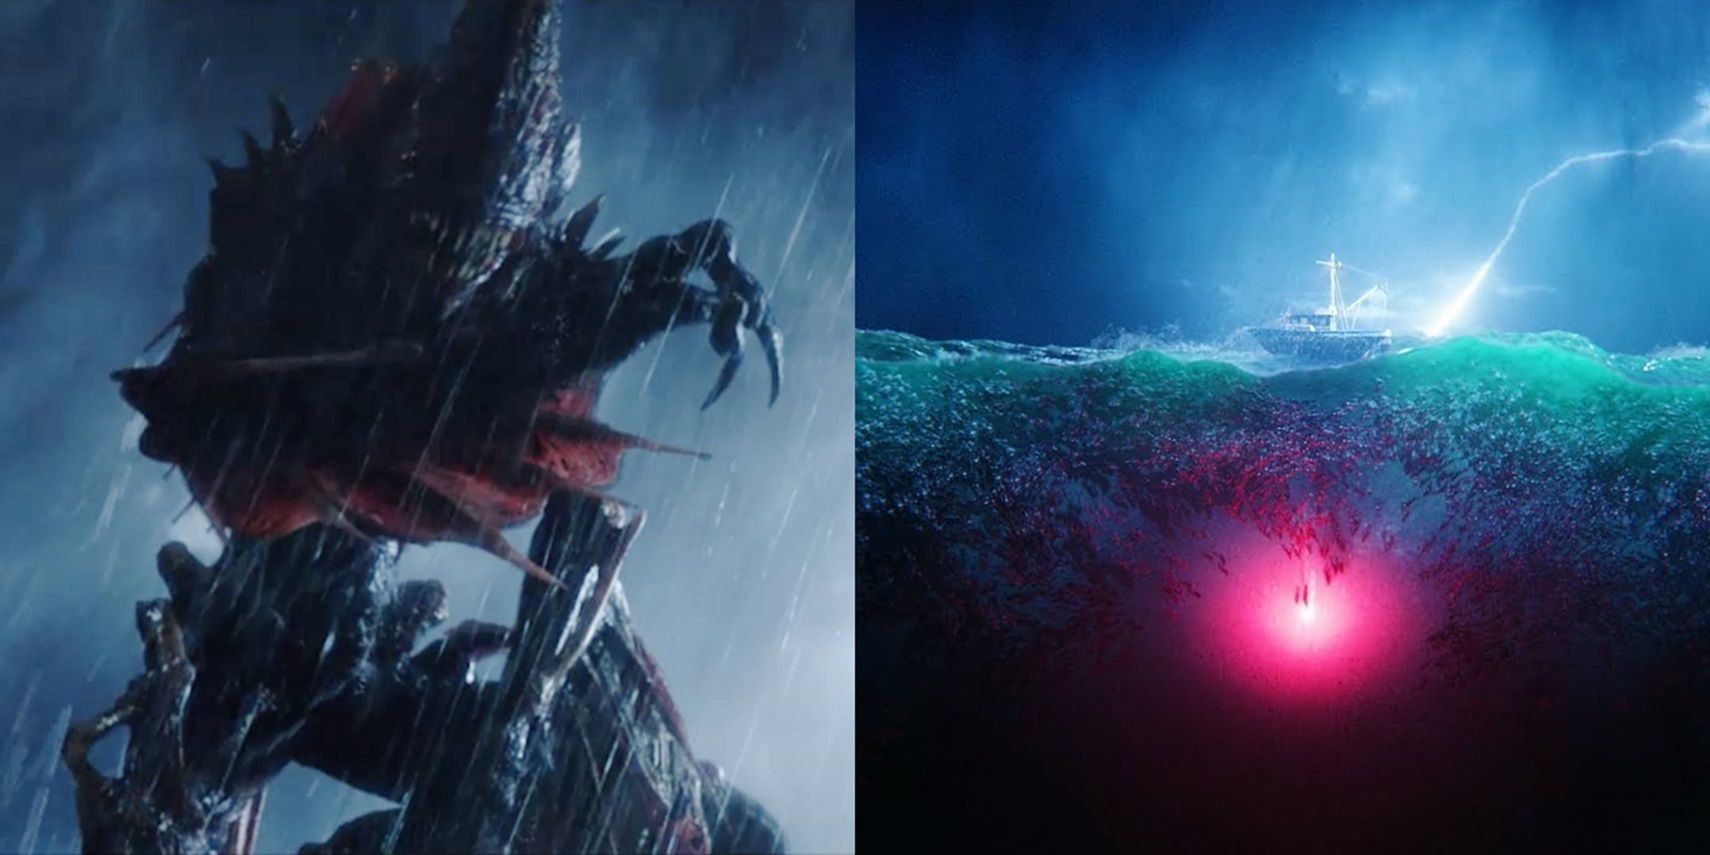 The Kingdom of the Trench in Aquaman